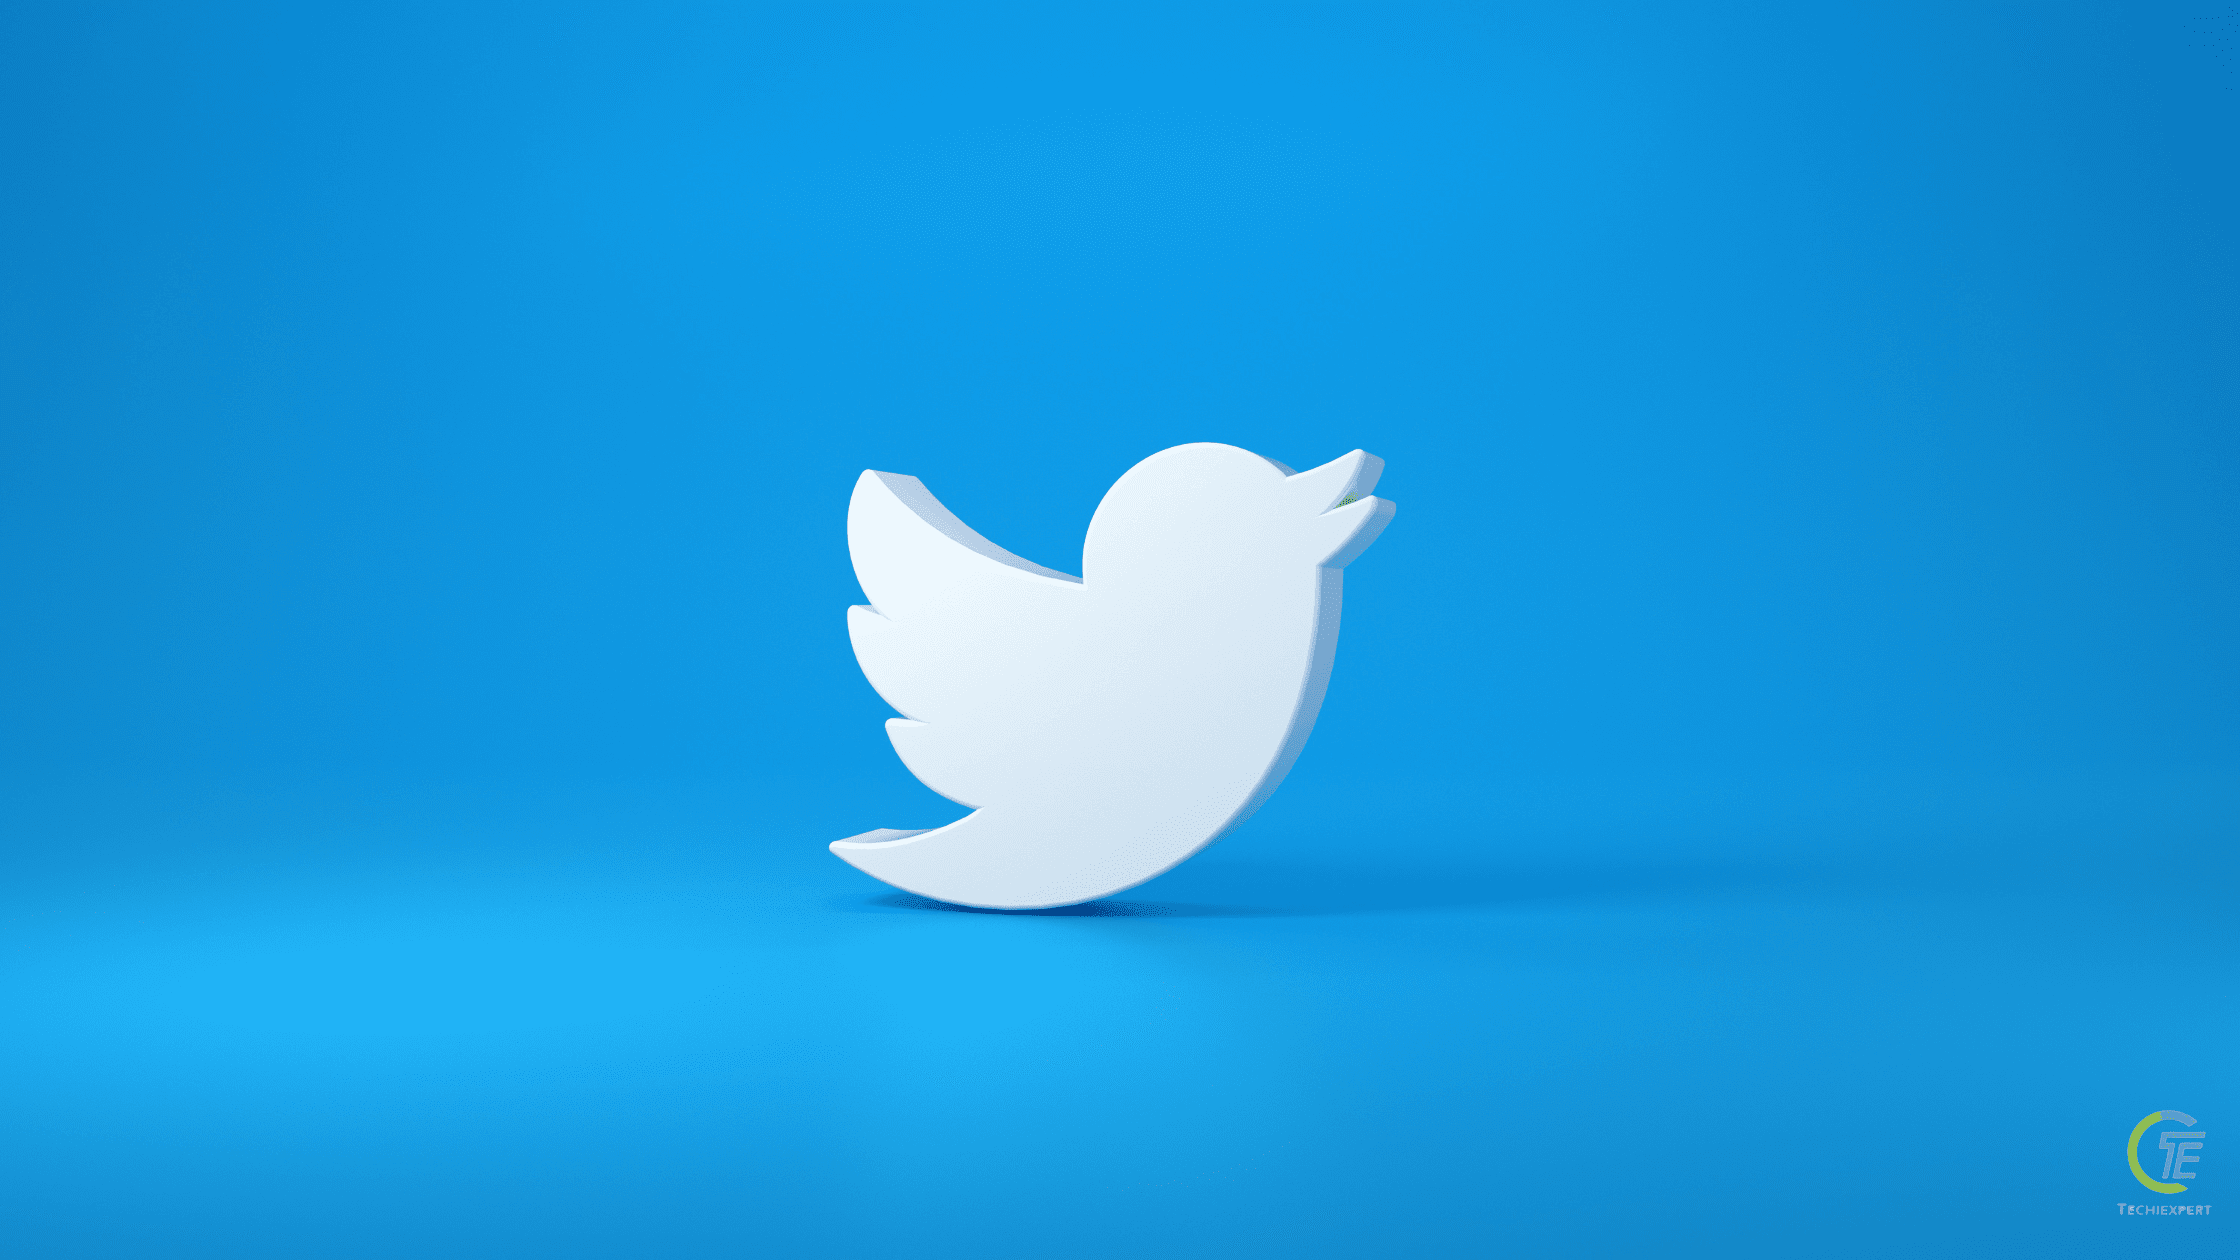 Twitter updates new ‘crisis misinformation policy